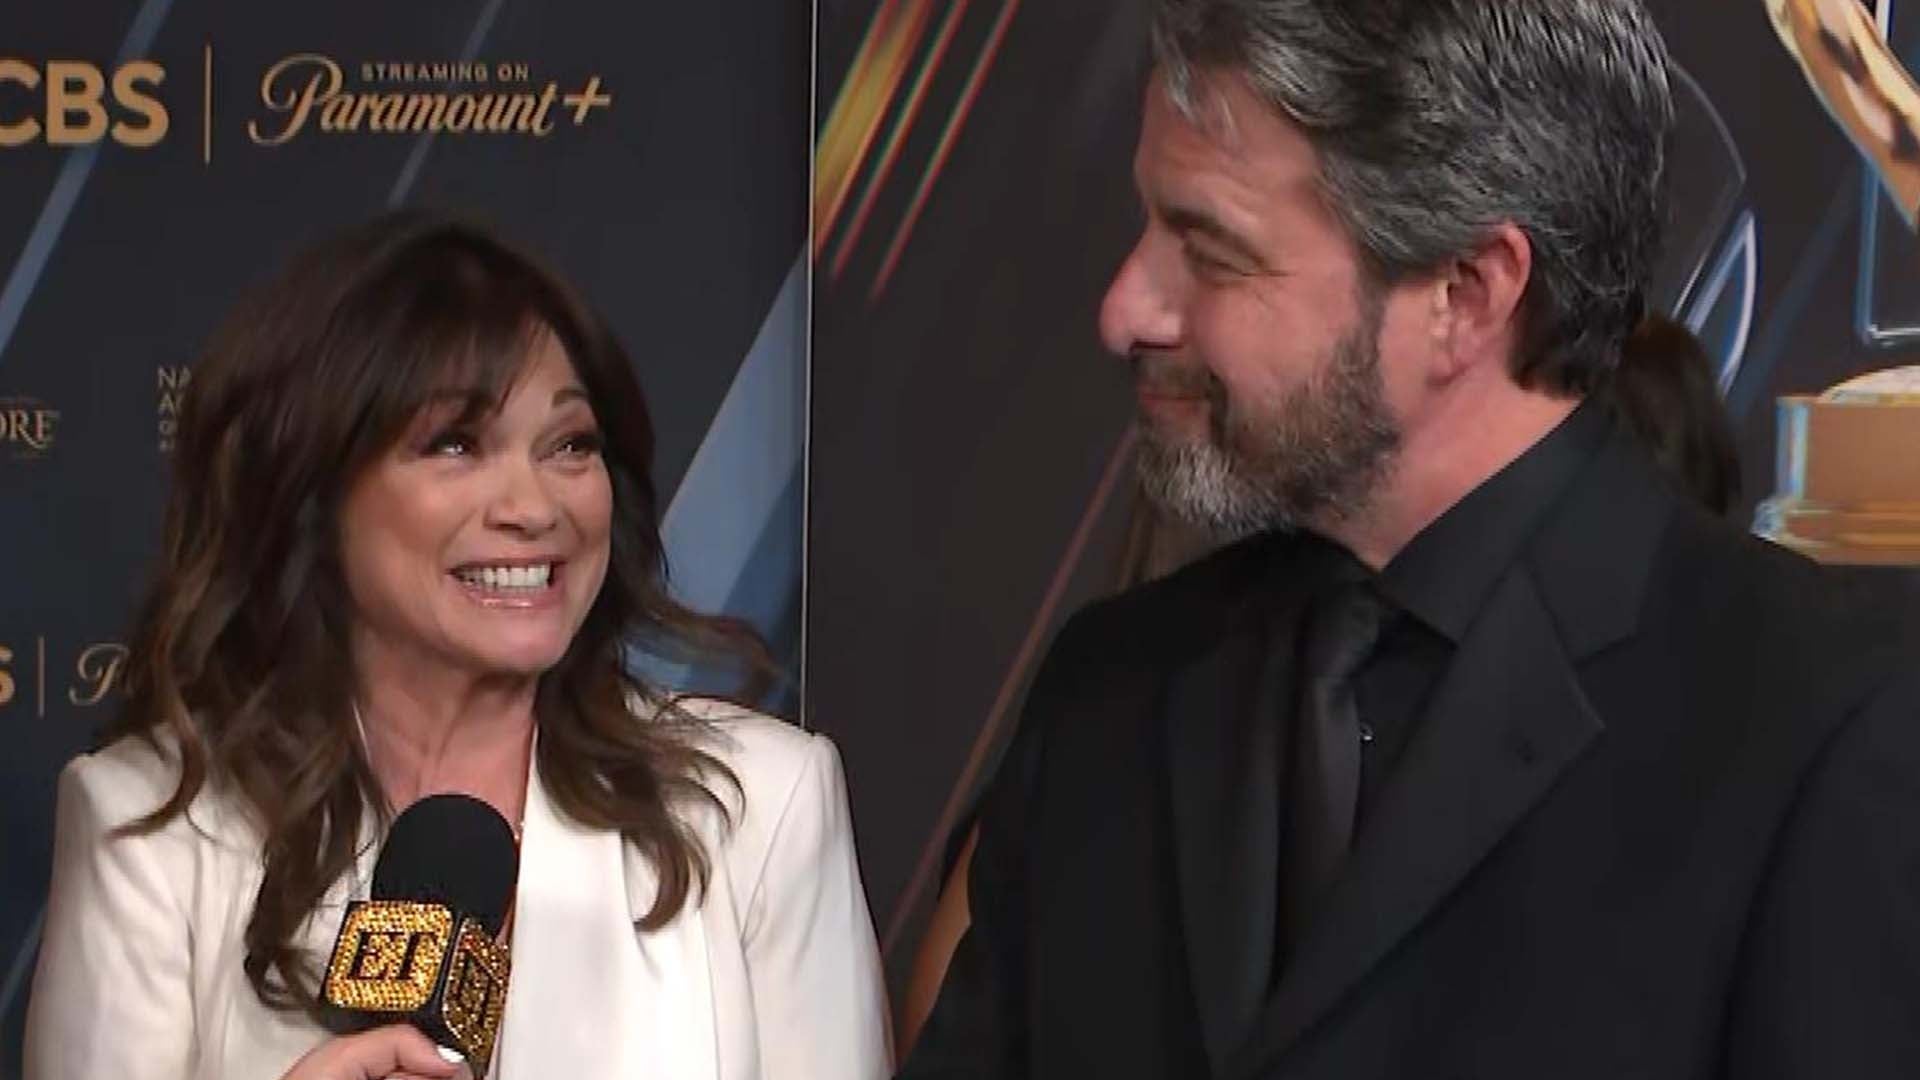 Valerie Bertinelli's Boyfriend Mike Goodnough Blushes as She Names Fav Things About Him (Exclusive)